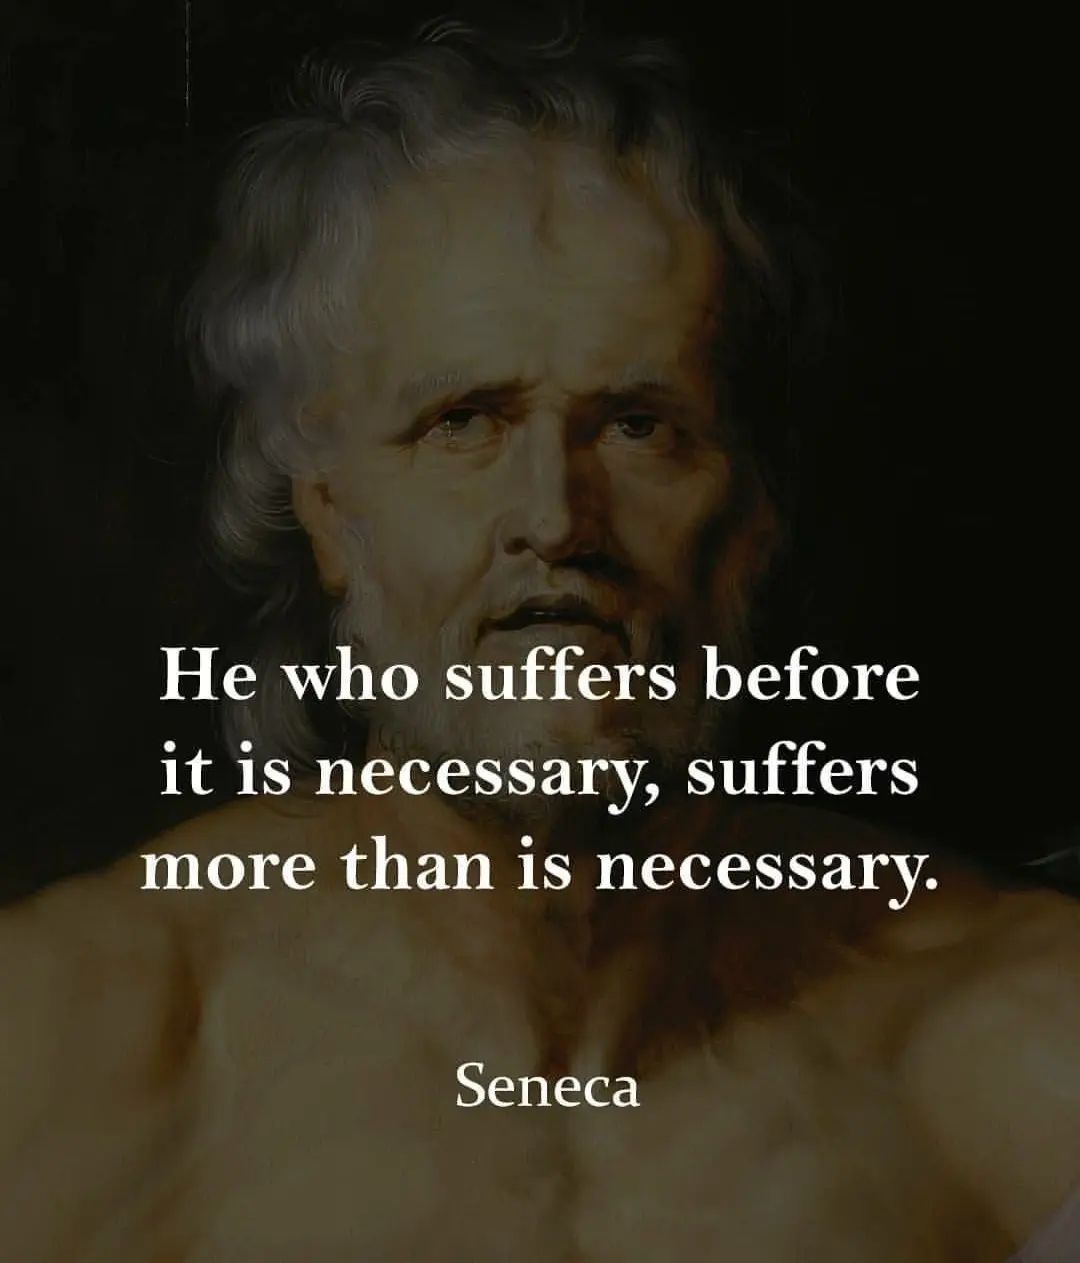 Seneca – He suffers more than necessary, who suffers before it is necessary.